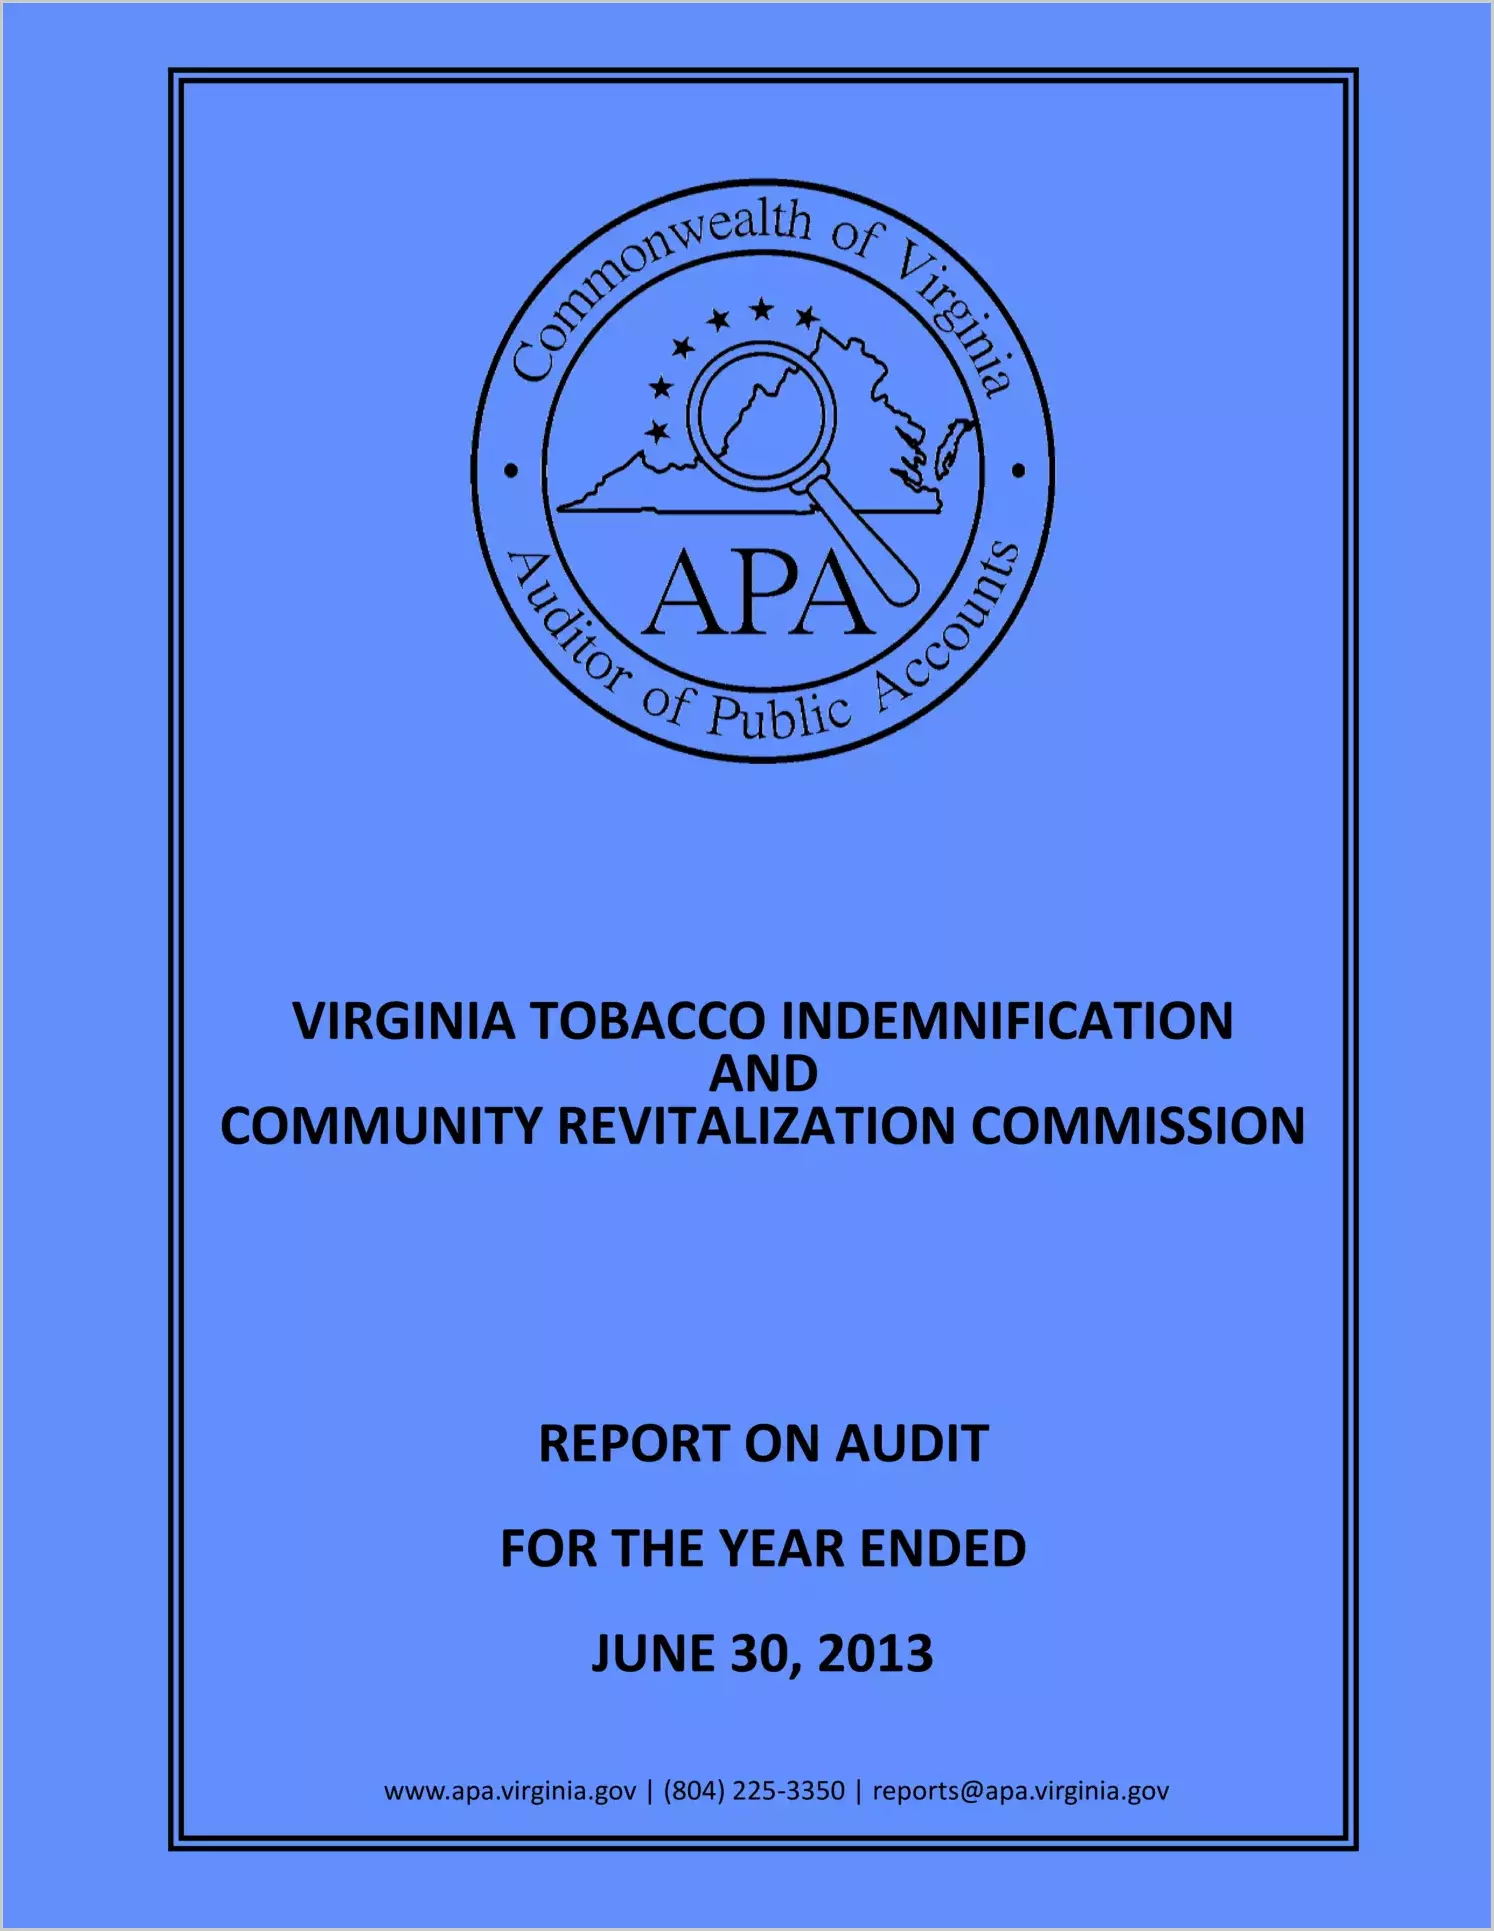 Tobacco Indemnification and Community Revitalization Commission for the year ended June 30, 2013